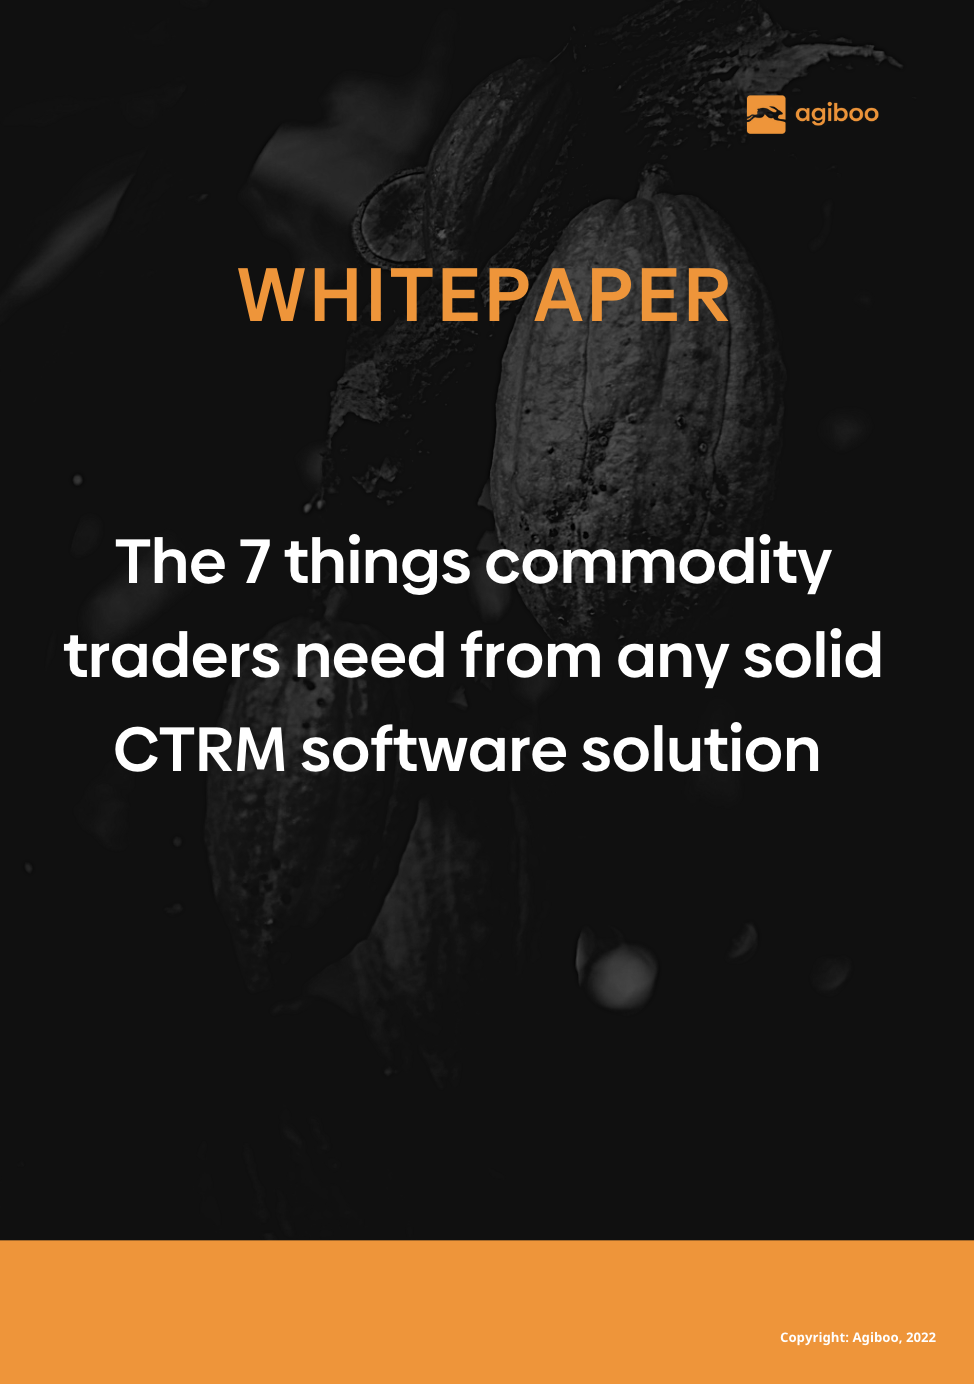 Whitepaper-7-things-commodity-traders